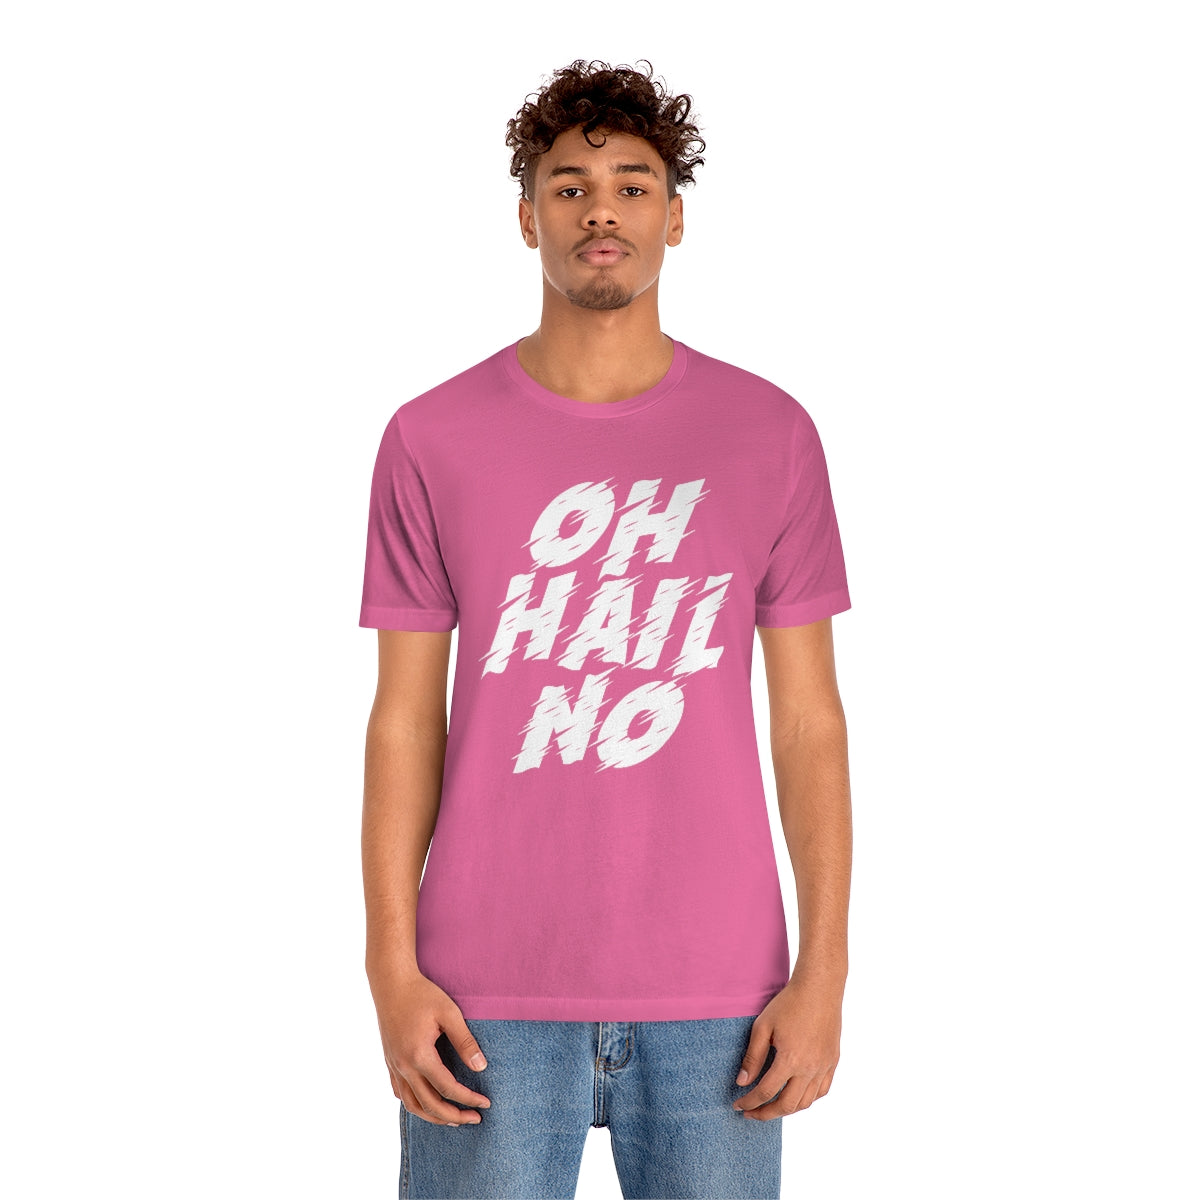 Hail Tee No – Helicity Oh Designs